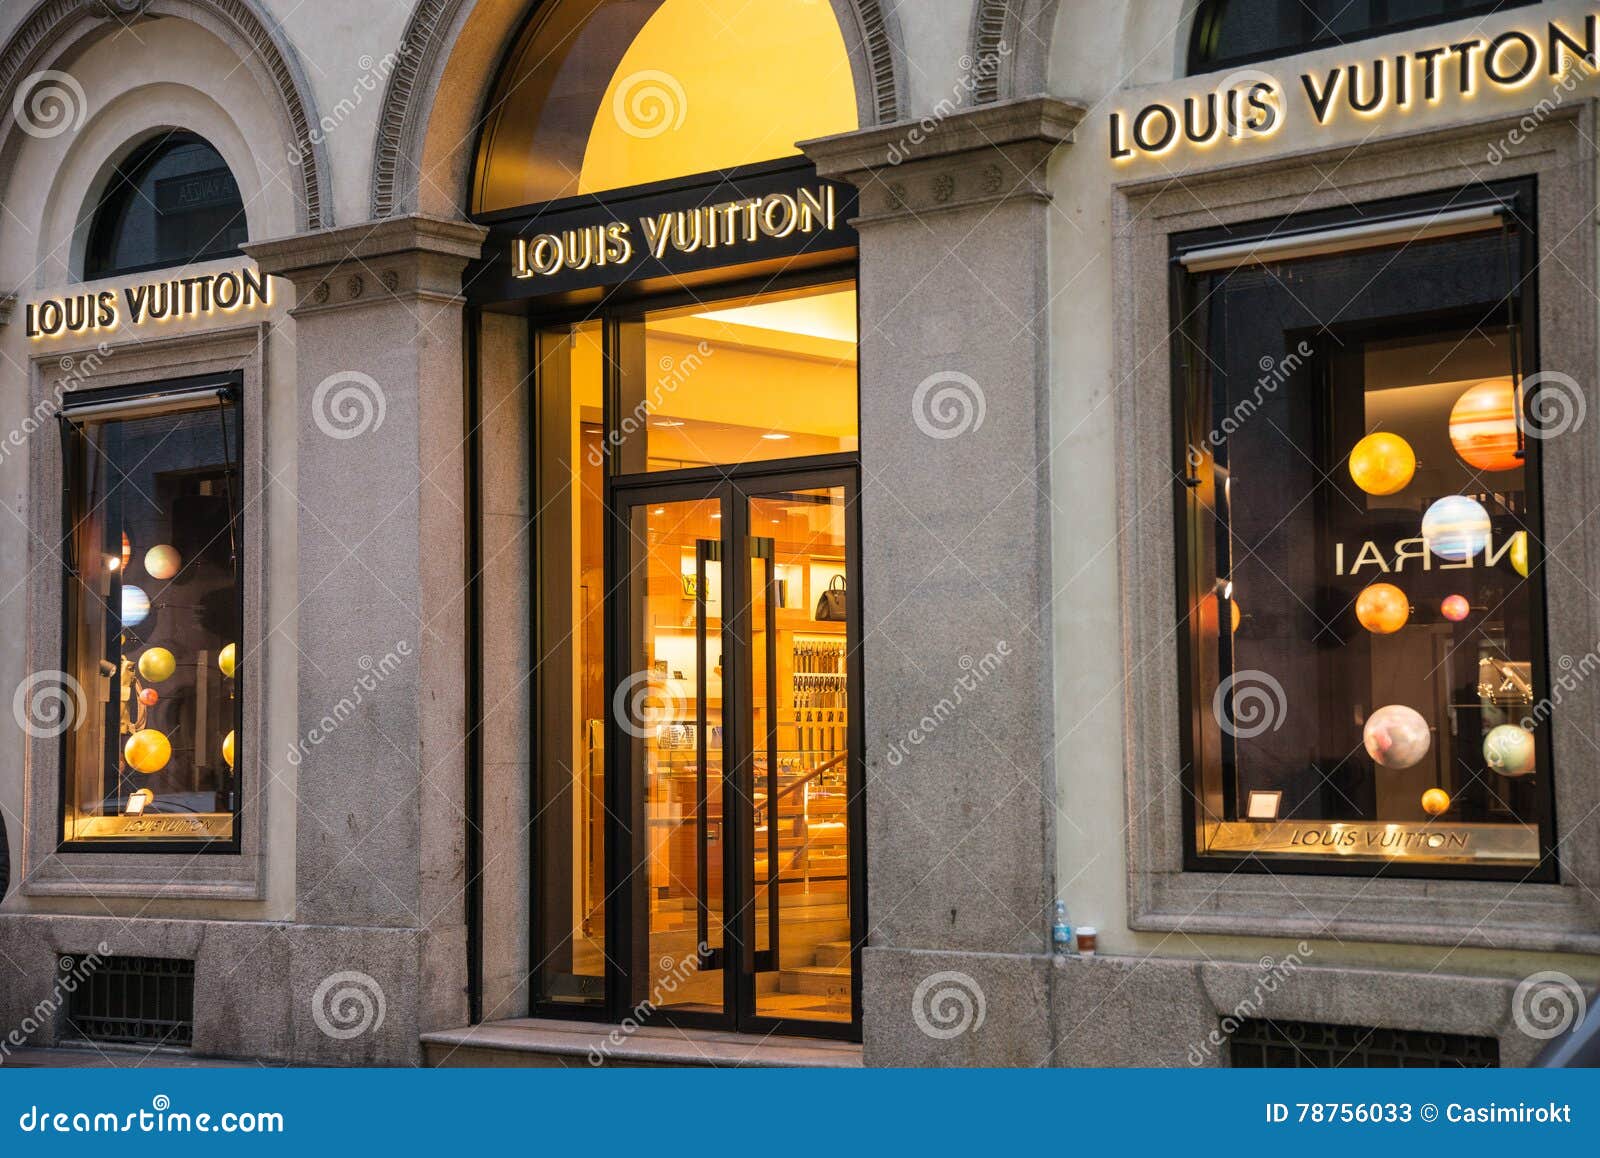 Louis Vuitton Sign on Street Shop Window Milan Editorial Stock Image -  Image of corporation, entrance: 97104229